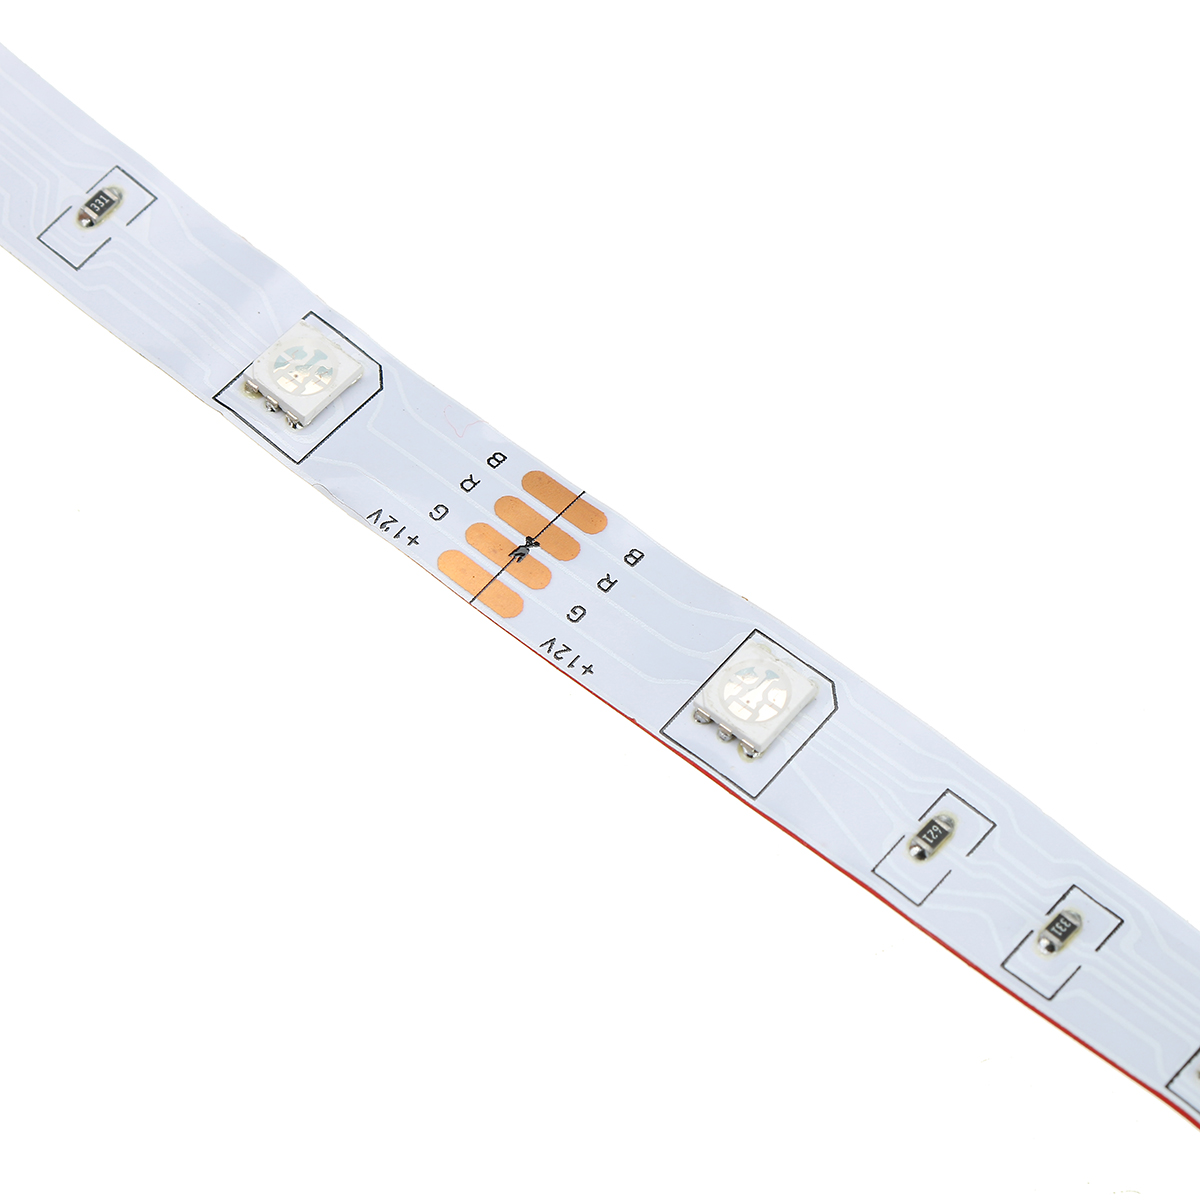 Find 5050 SMD RGB Wifi Wireless Strip Light 24 key Voice Control 30LED/M Alexa Smart Home Waterproof Strip Light for Sale on Gipsybee.com with cryptocurrencies